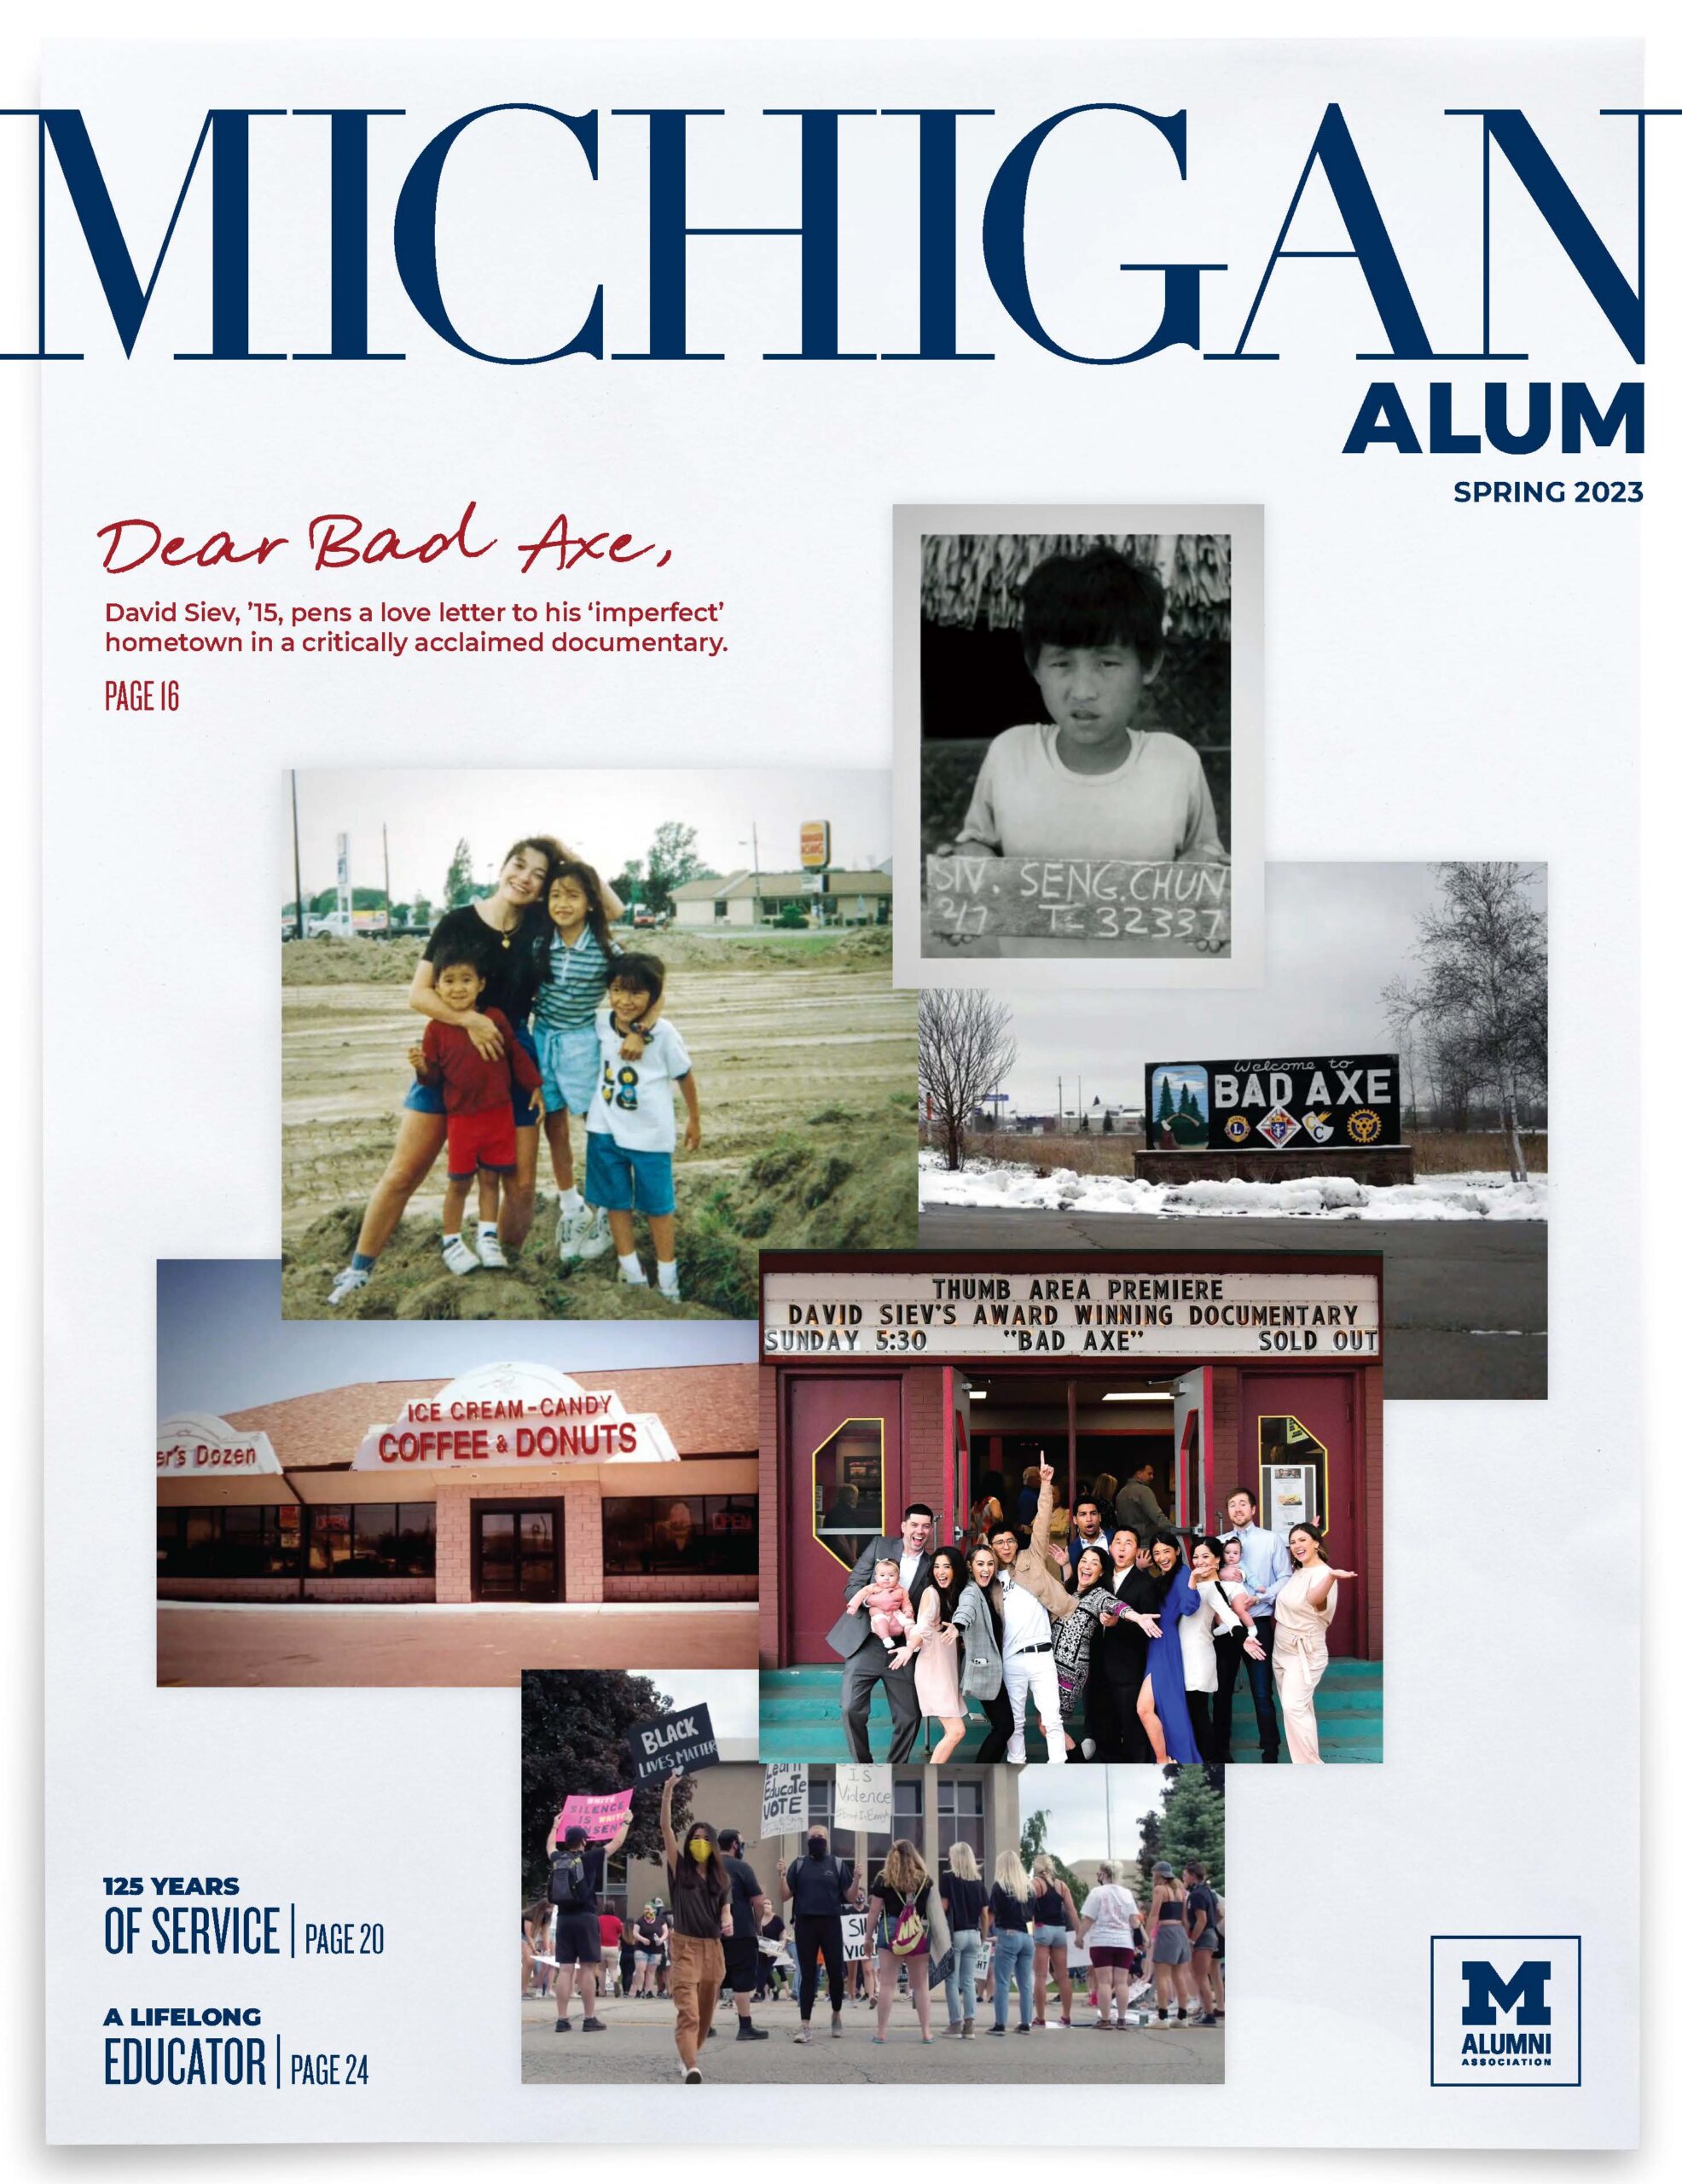 Cover of the Spring '23 issue of Michigan Alum, featuring "Dear Bad Axe"